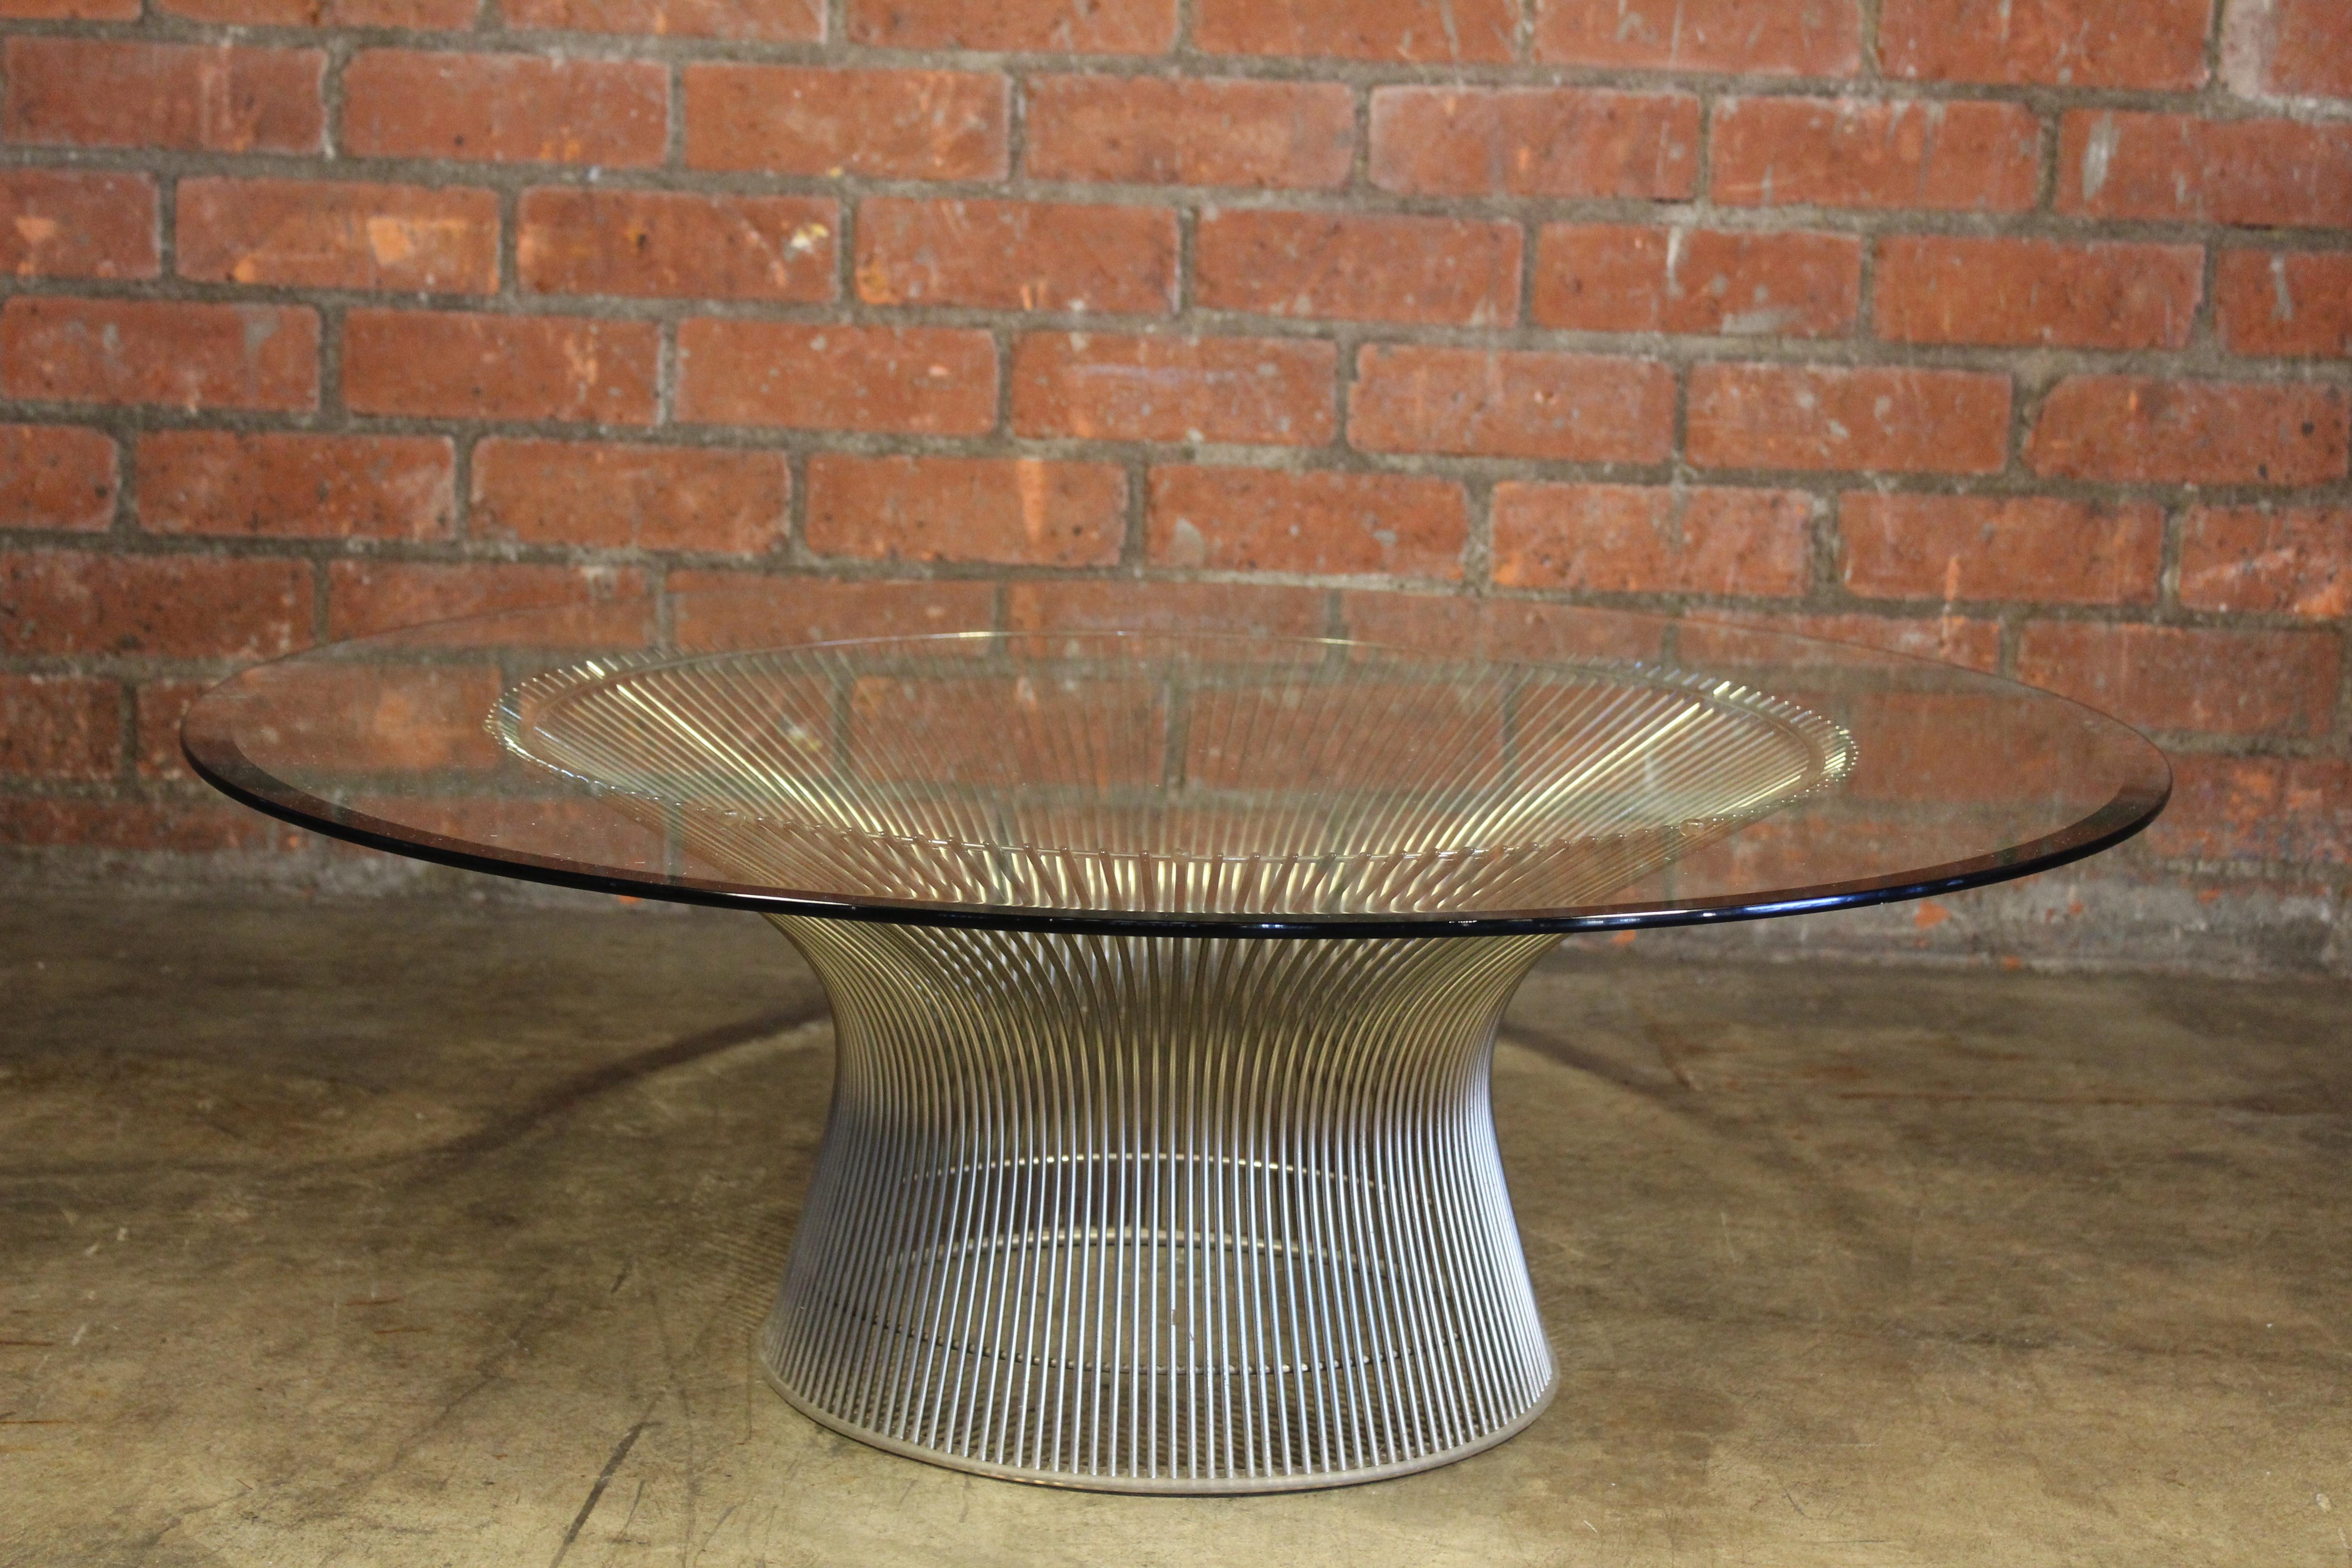 A vintage chrome plated steel coffee table by Warren Platner for Knoll, 1970s. The chrome shows minor signs of oxidation, and the glass has a few scratches.